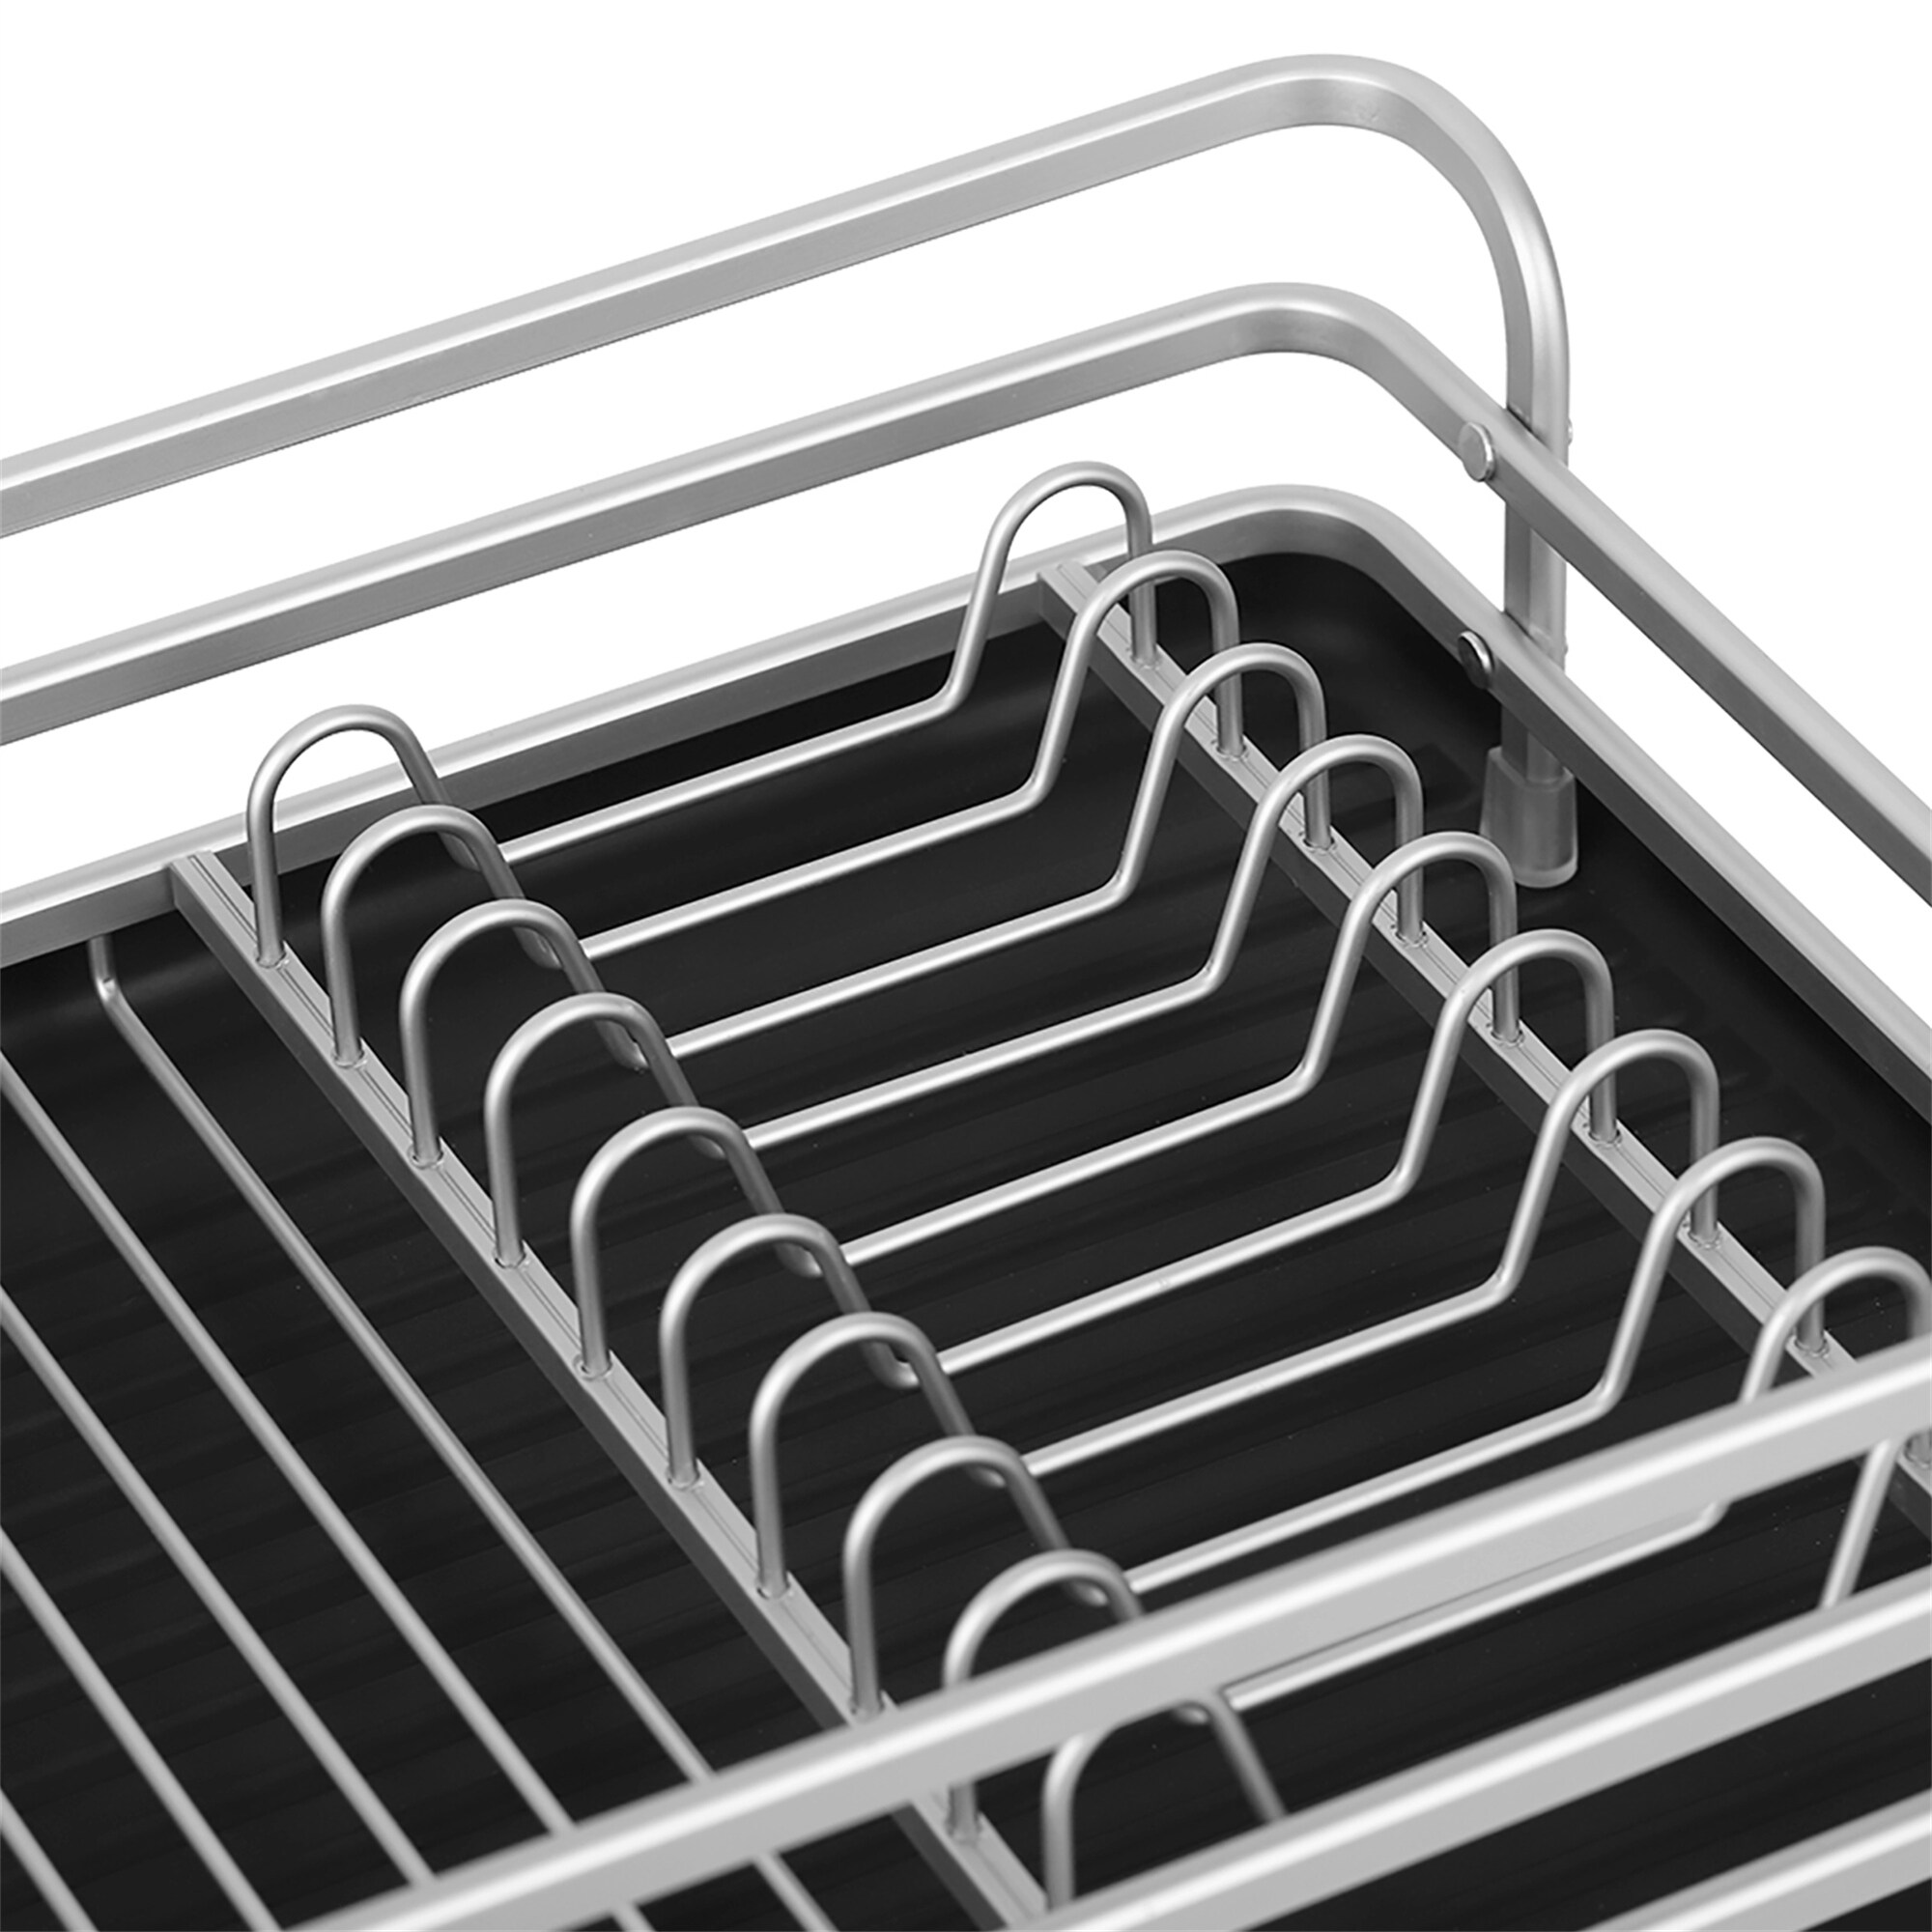 https://ak1.ostkcdn.com/images/products/is/images/direct/f68807b74ad7a18dcd1976e15a507c76fee038a2/Aluminum-Dish-Drying-Rack-with-Cutlery-Holder%2C-Silver.jpg